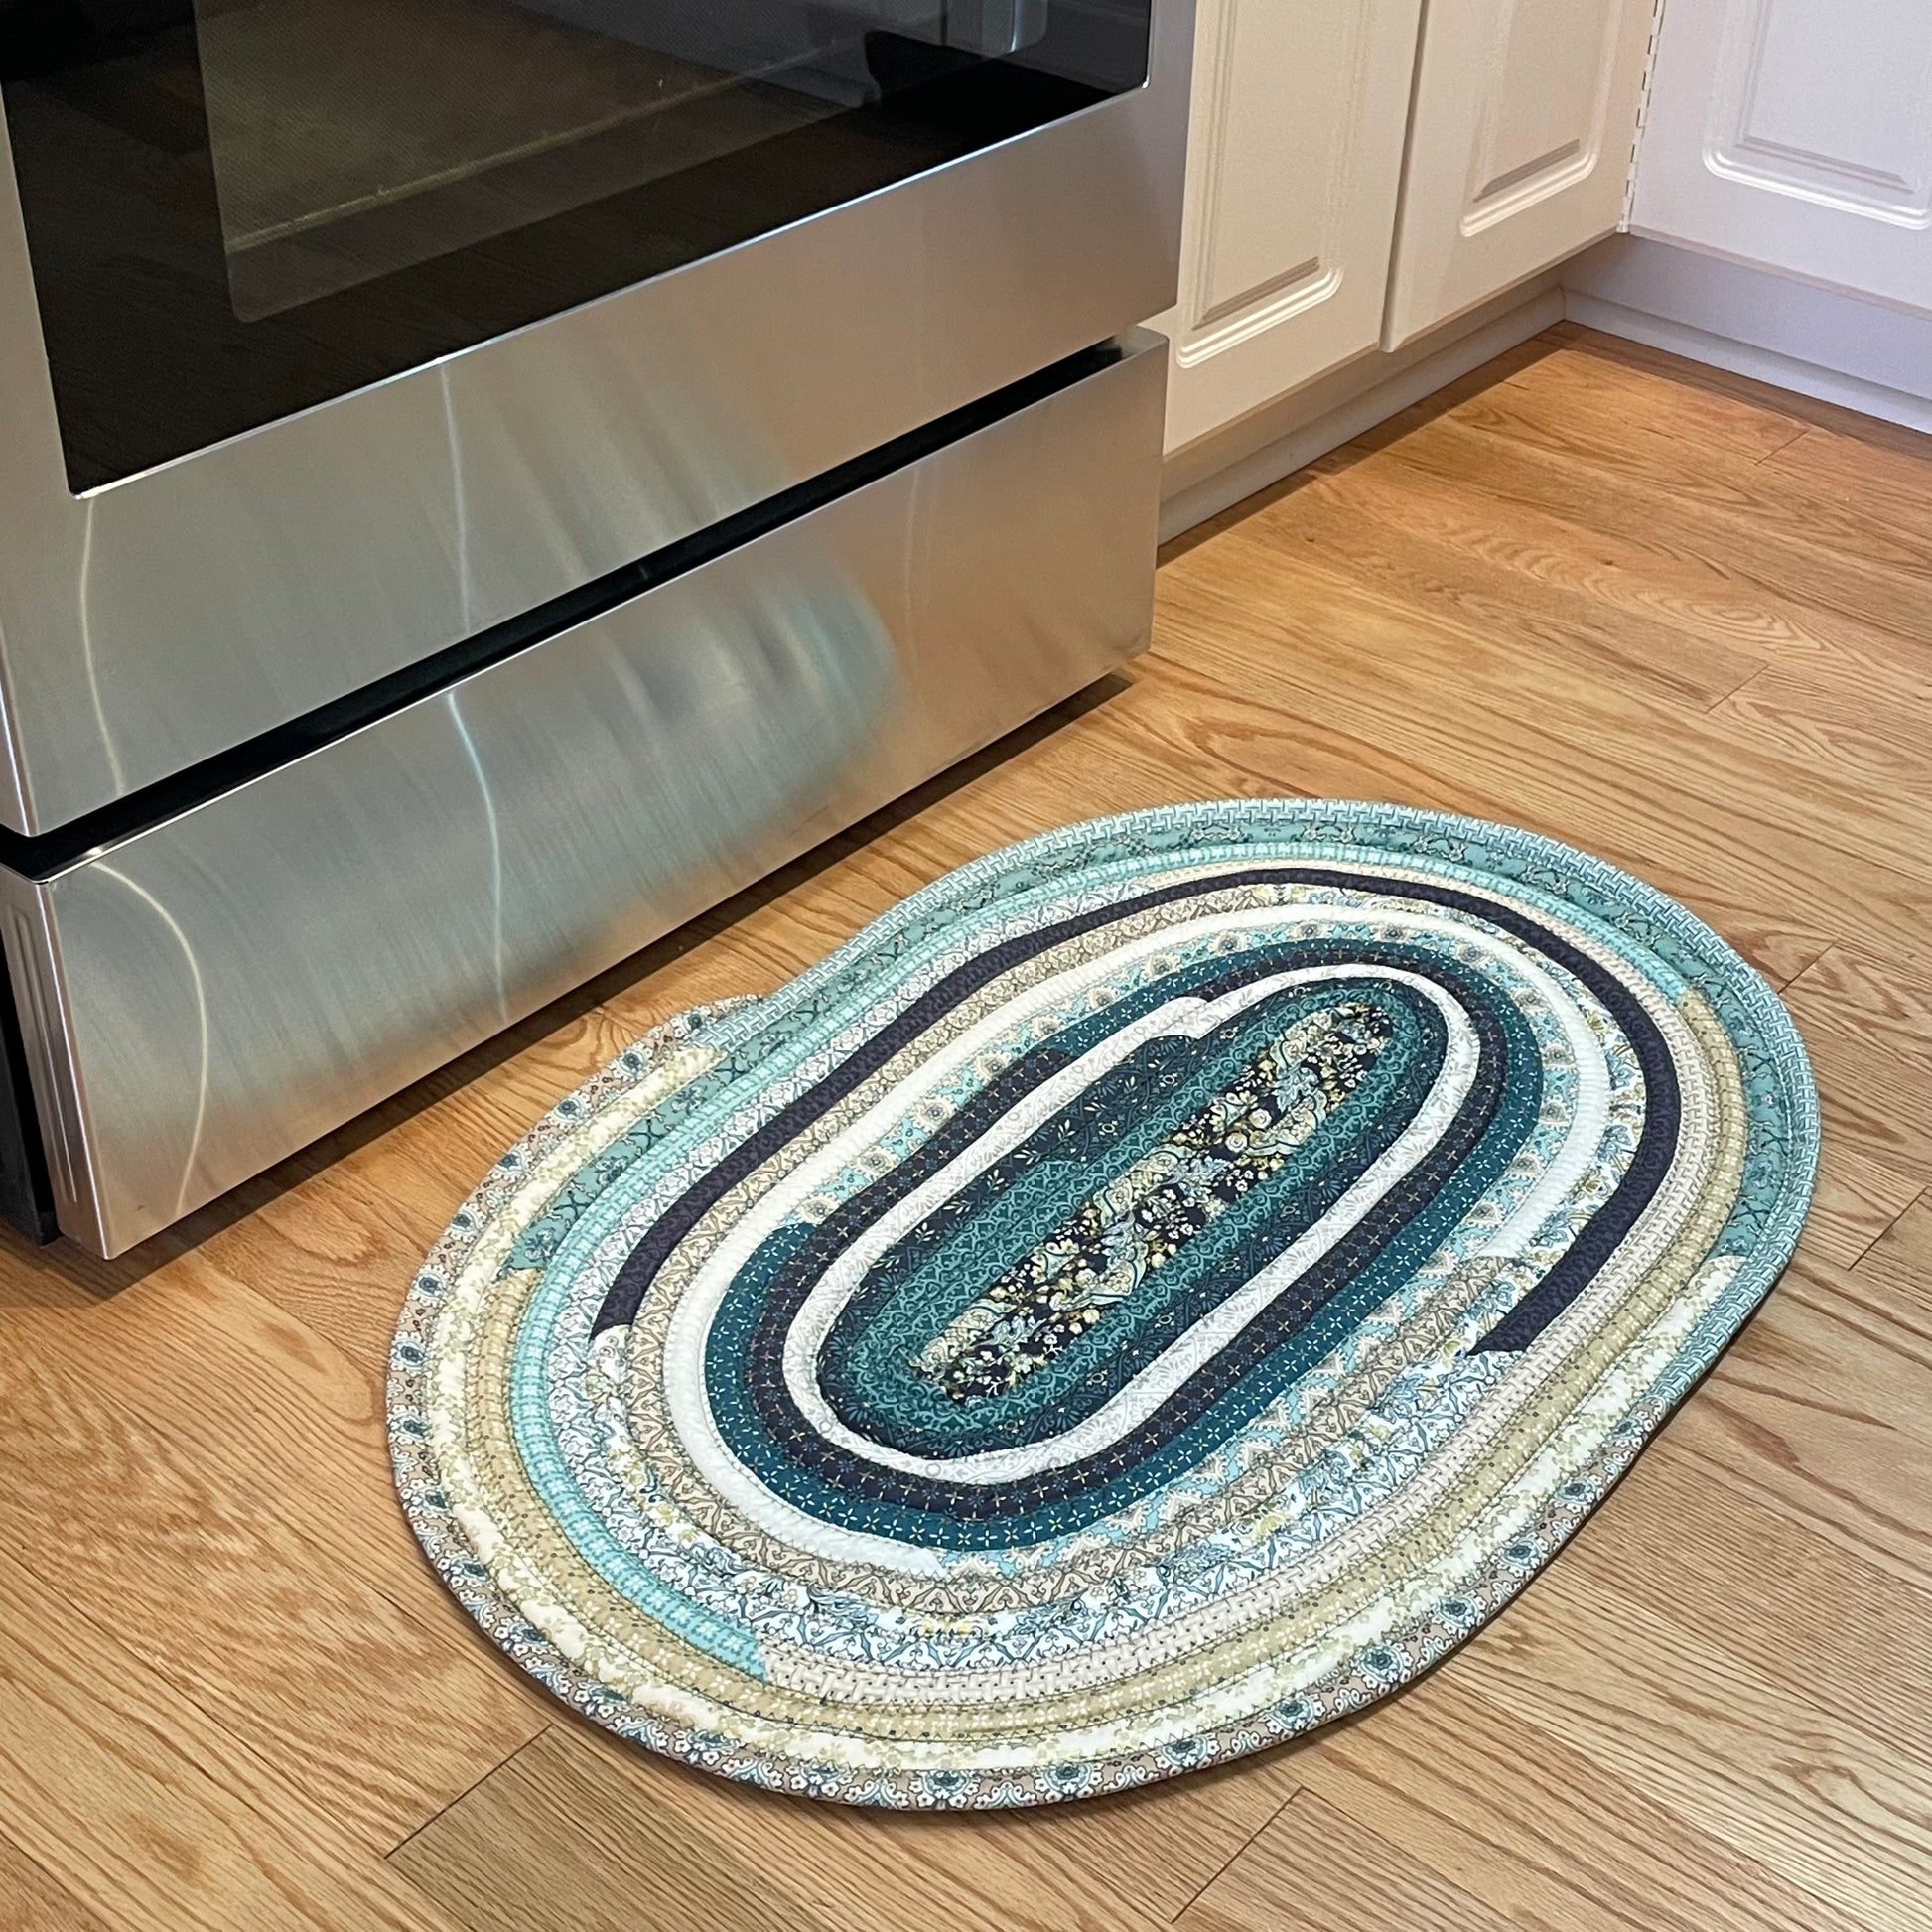 Farmhouse Kitchen Rug, Handmade Washable Kitchen Rug.  Otherwise known as a Jelly Roll Rug our rugs are handmade in Canada.  